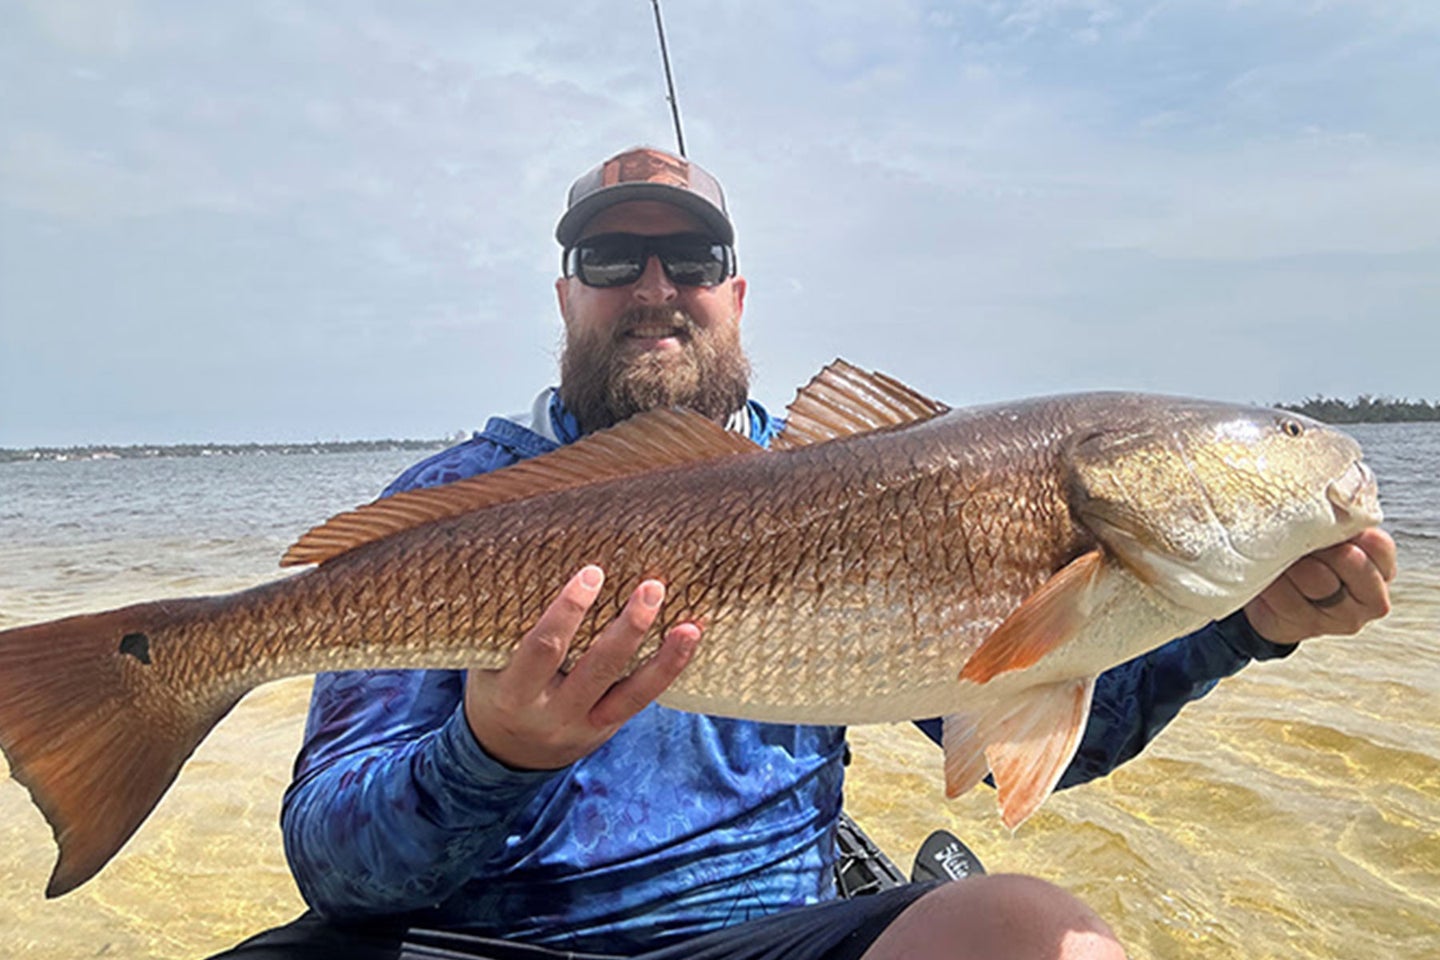 A Florida angler poses with a length-record redfish.